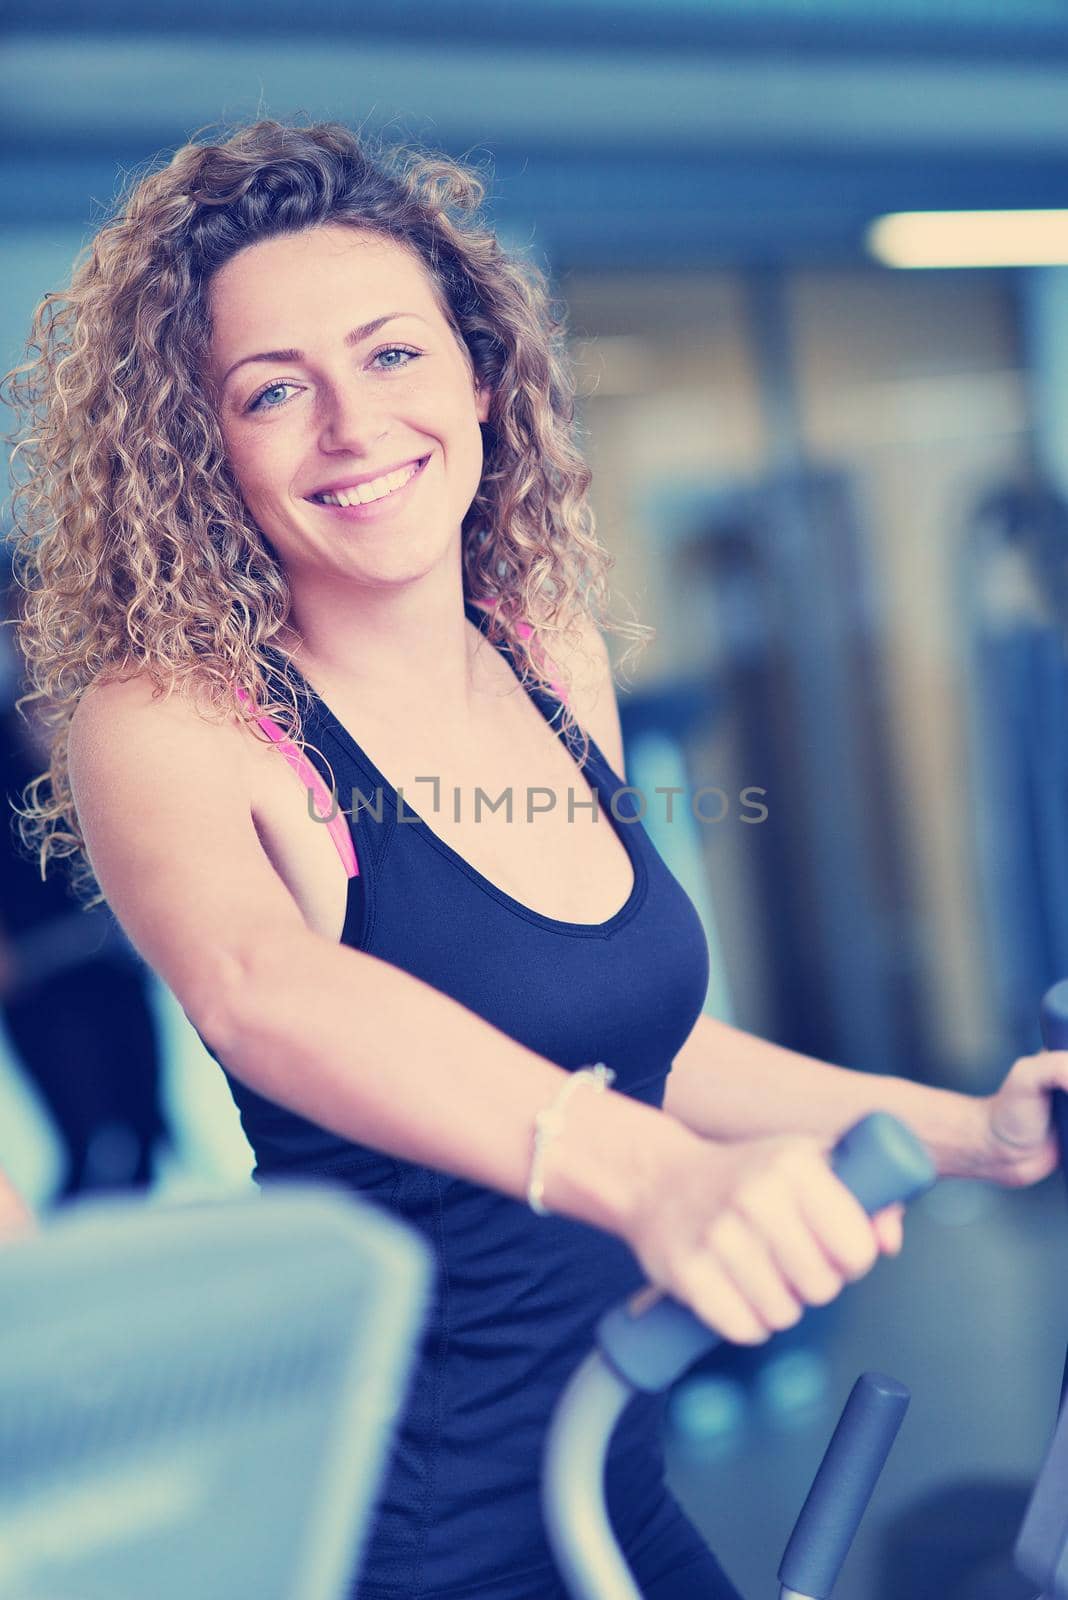 woman exercising on treadmill in gym by dotshock